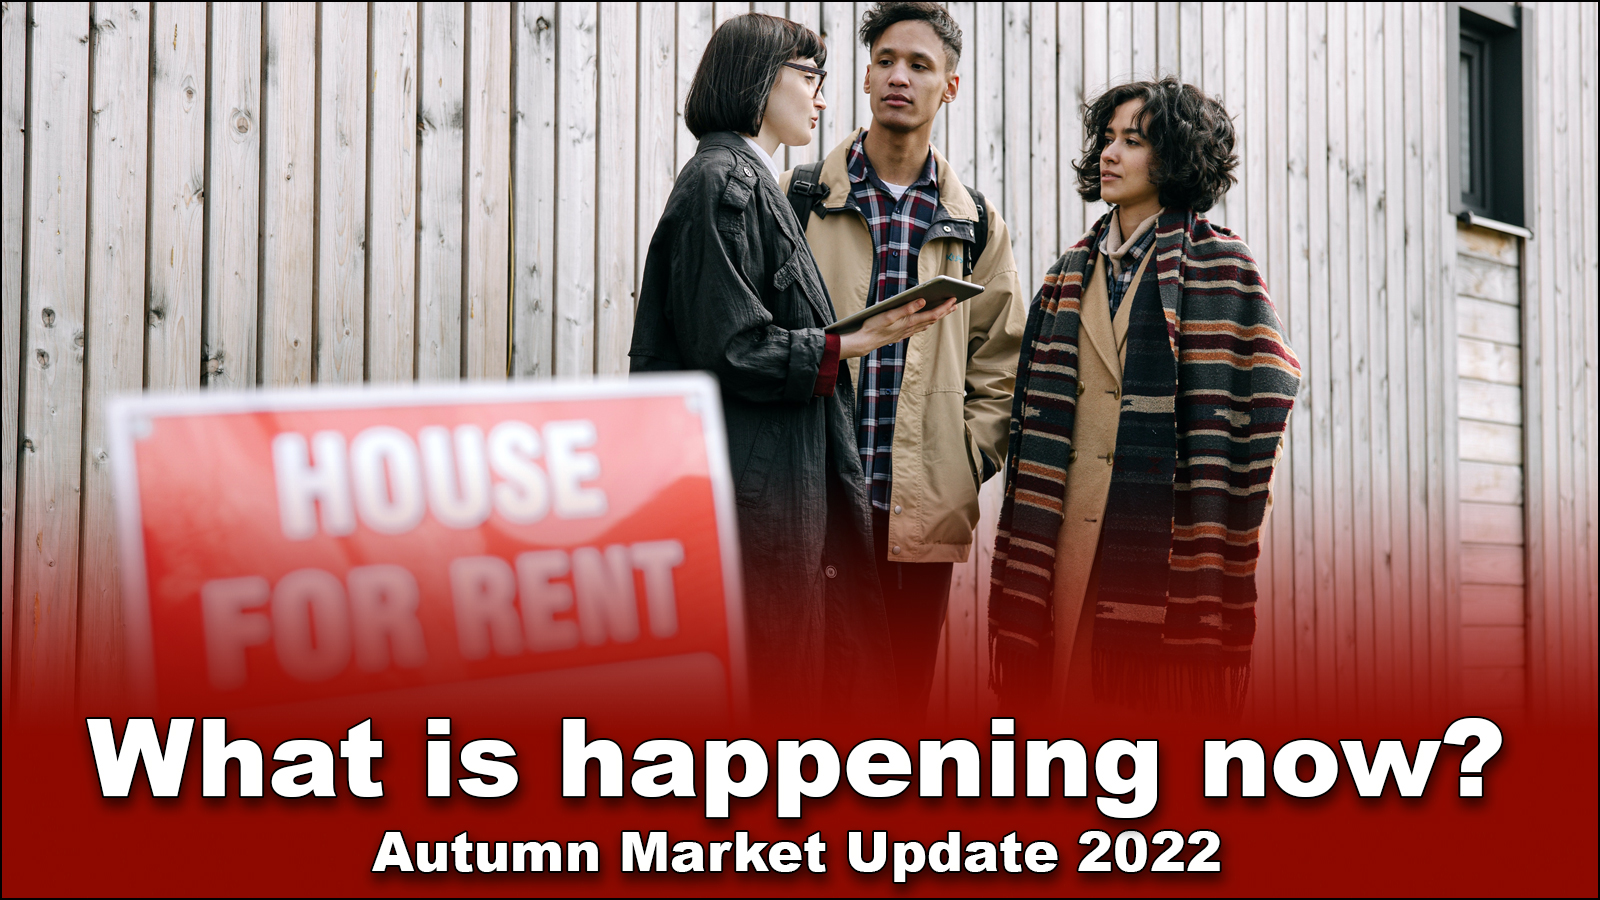 You are currently viewing Autumn Market Update